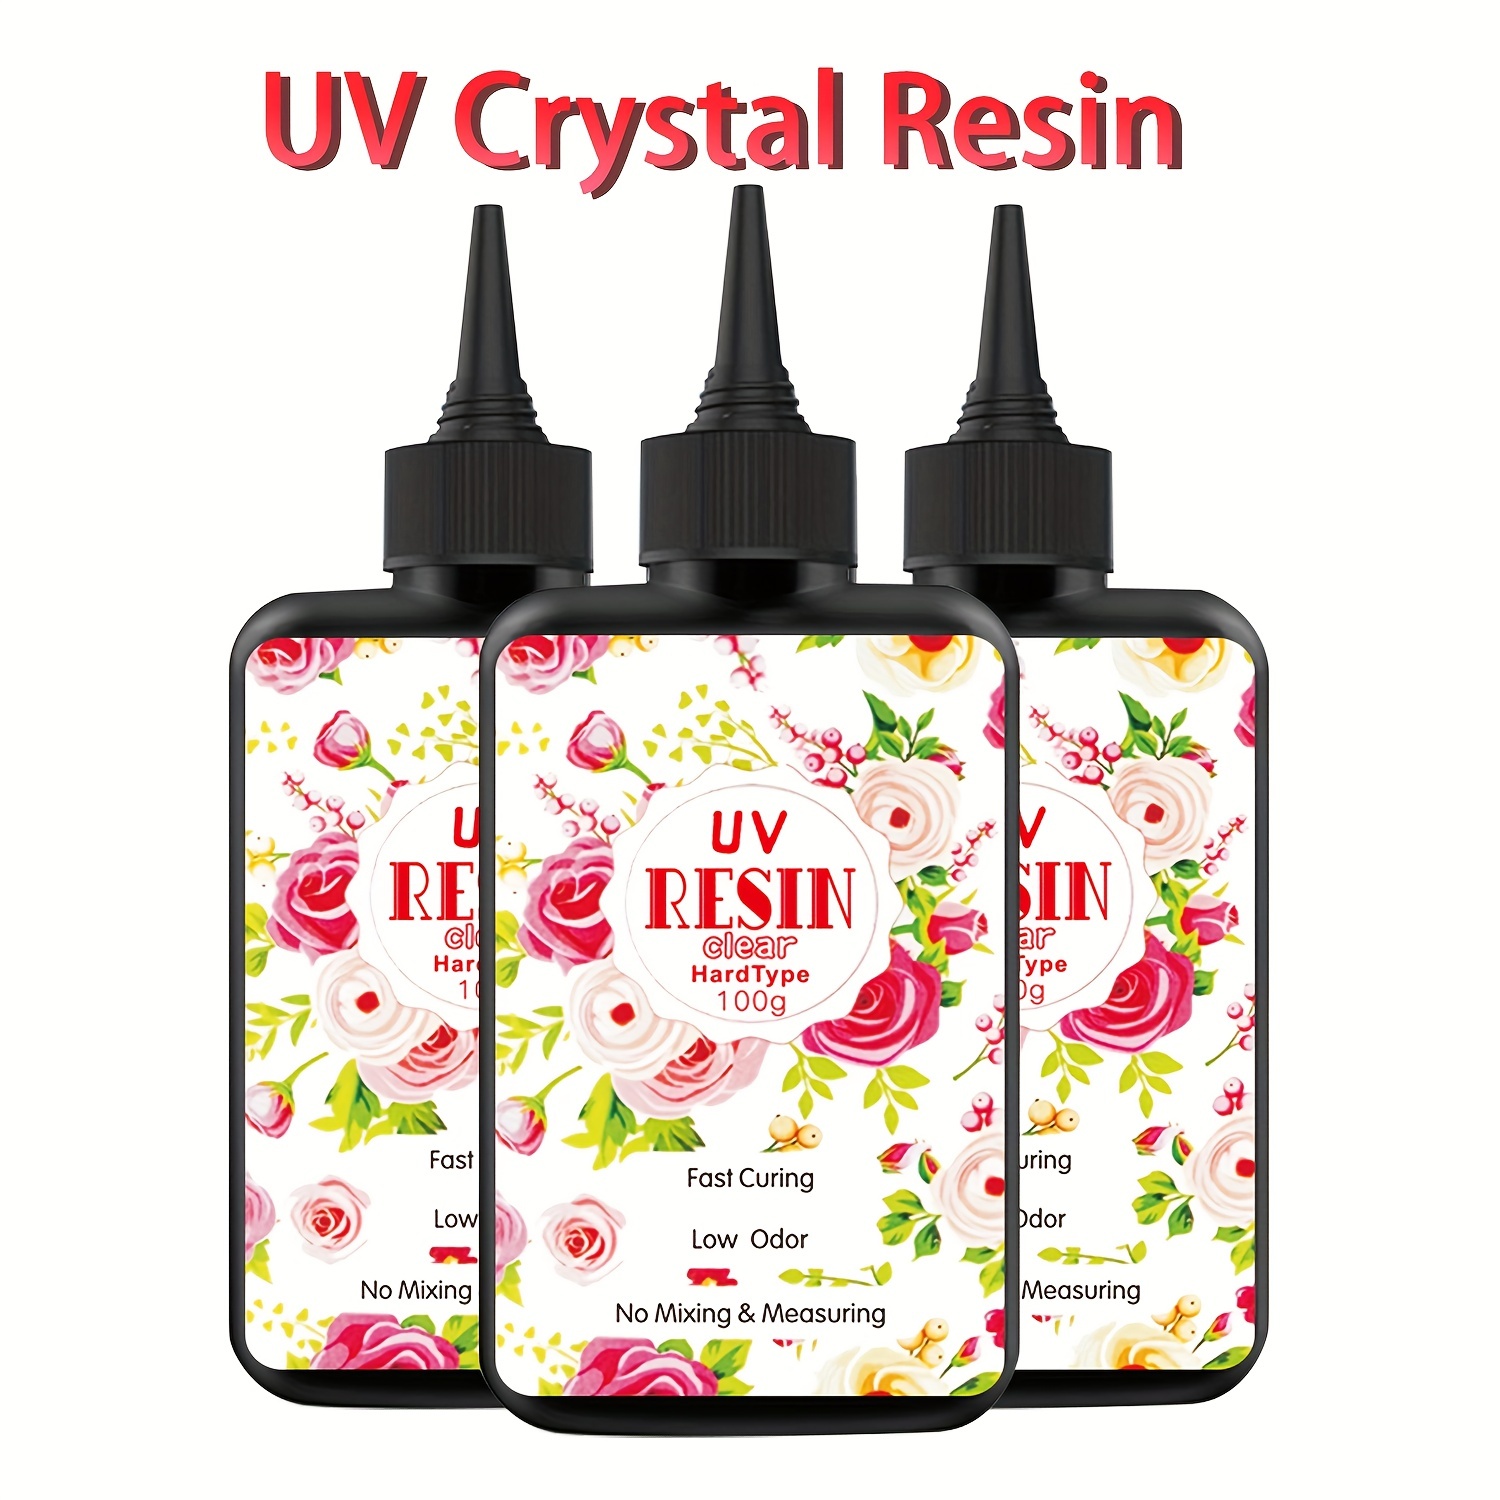 400g Clear UV Resin Kit - High Gloss UV Epoxy Resin Hard Type, Fast Curing,  Non Yellowing, Low Odor UV Cure Resin Ultraviolet Curing Resina UV Pre  Mixed Resin for Jewelry Making